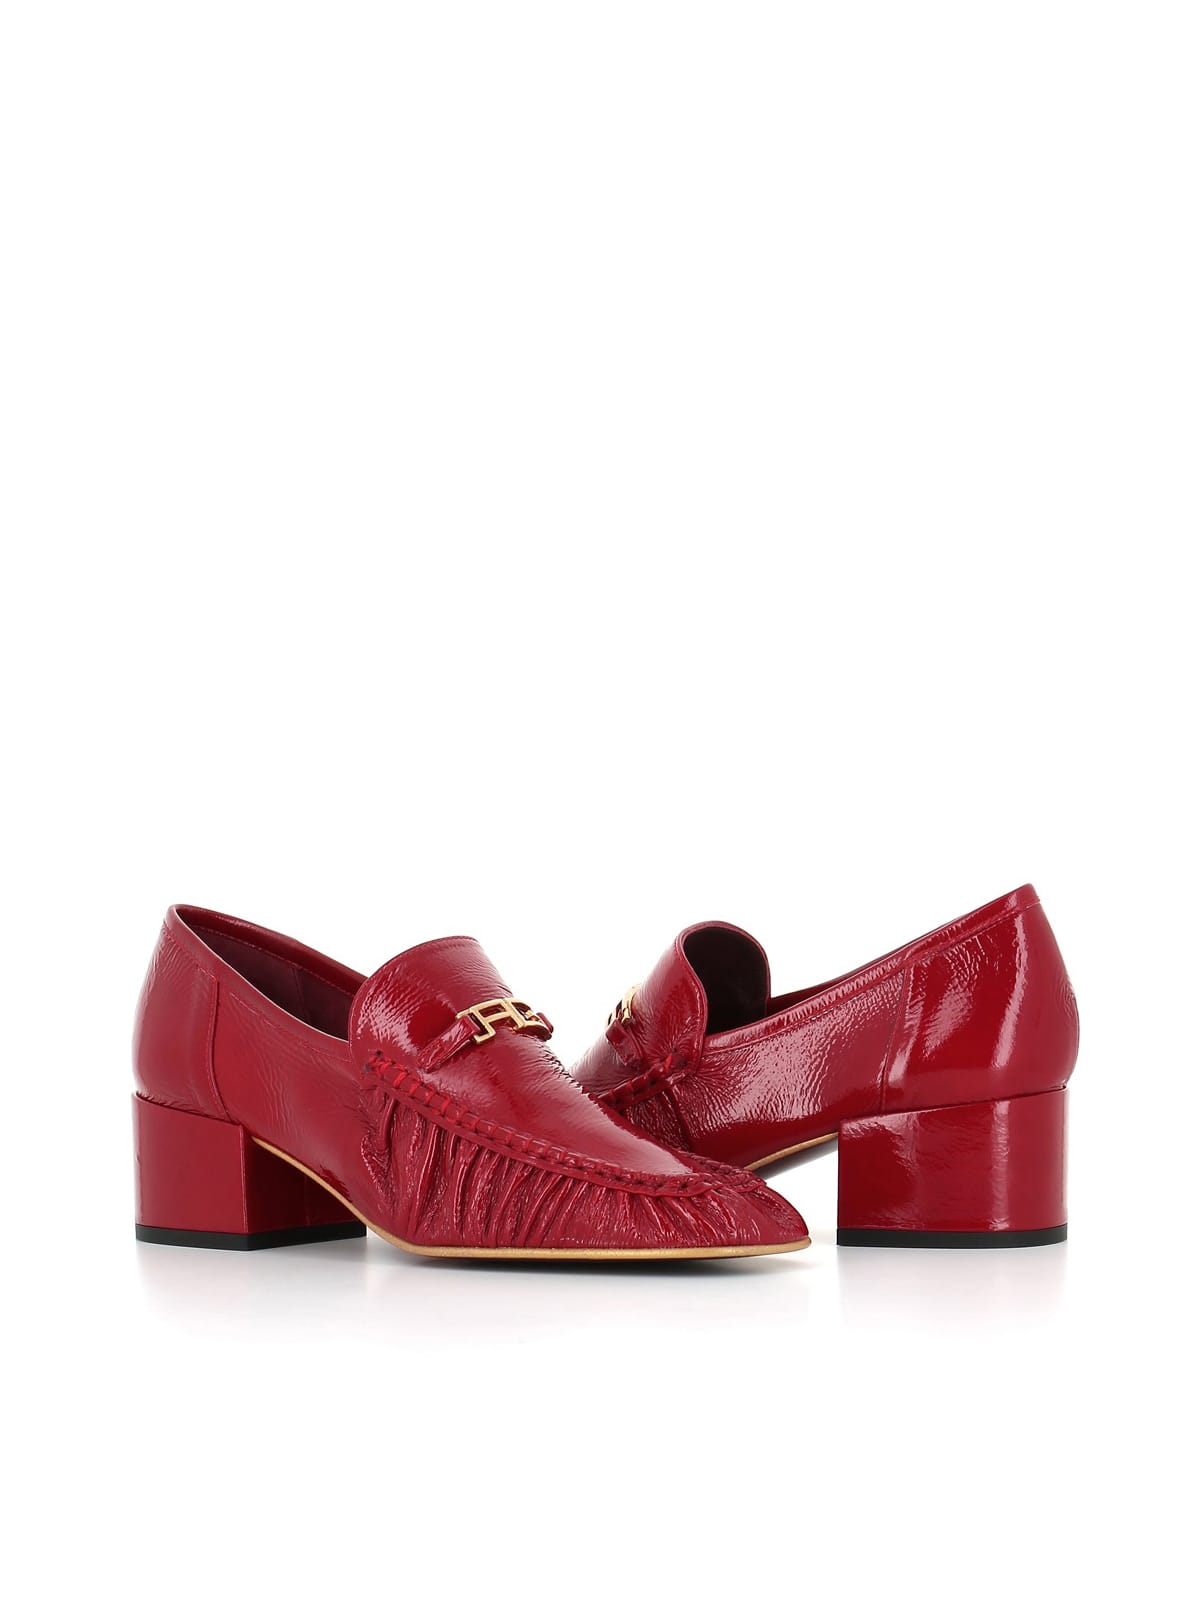 Avril Gau Loafer Aga E In Red